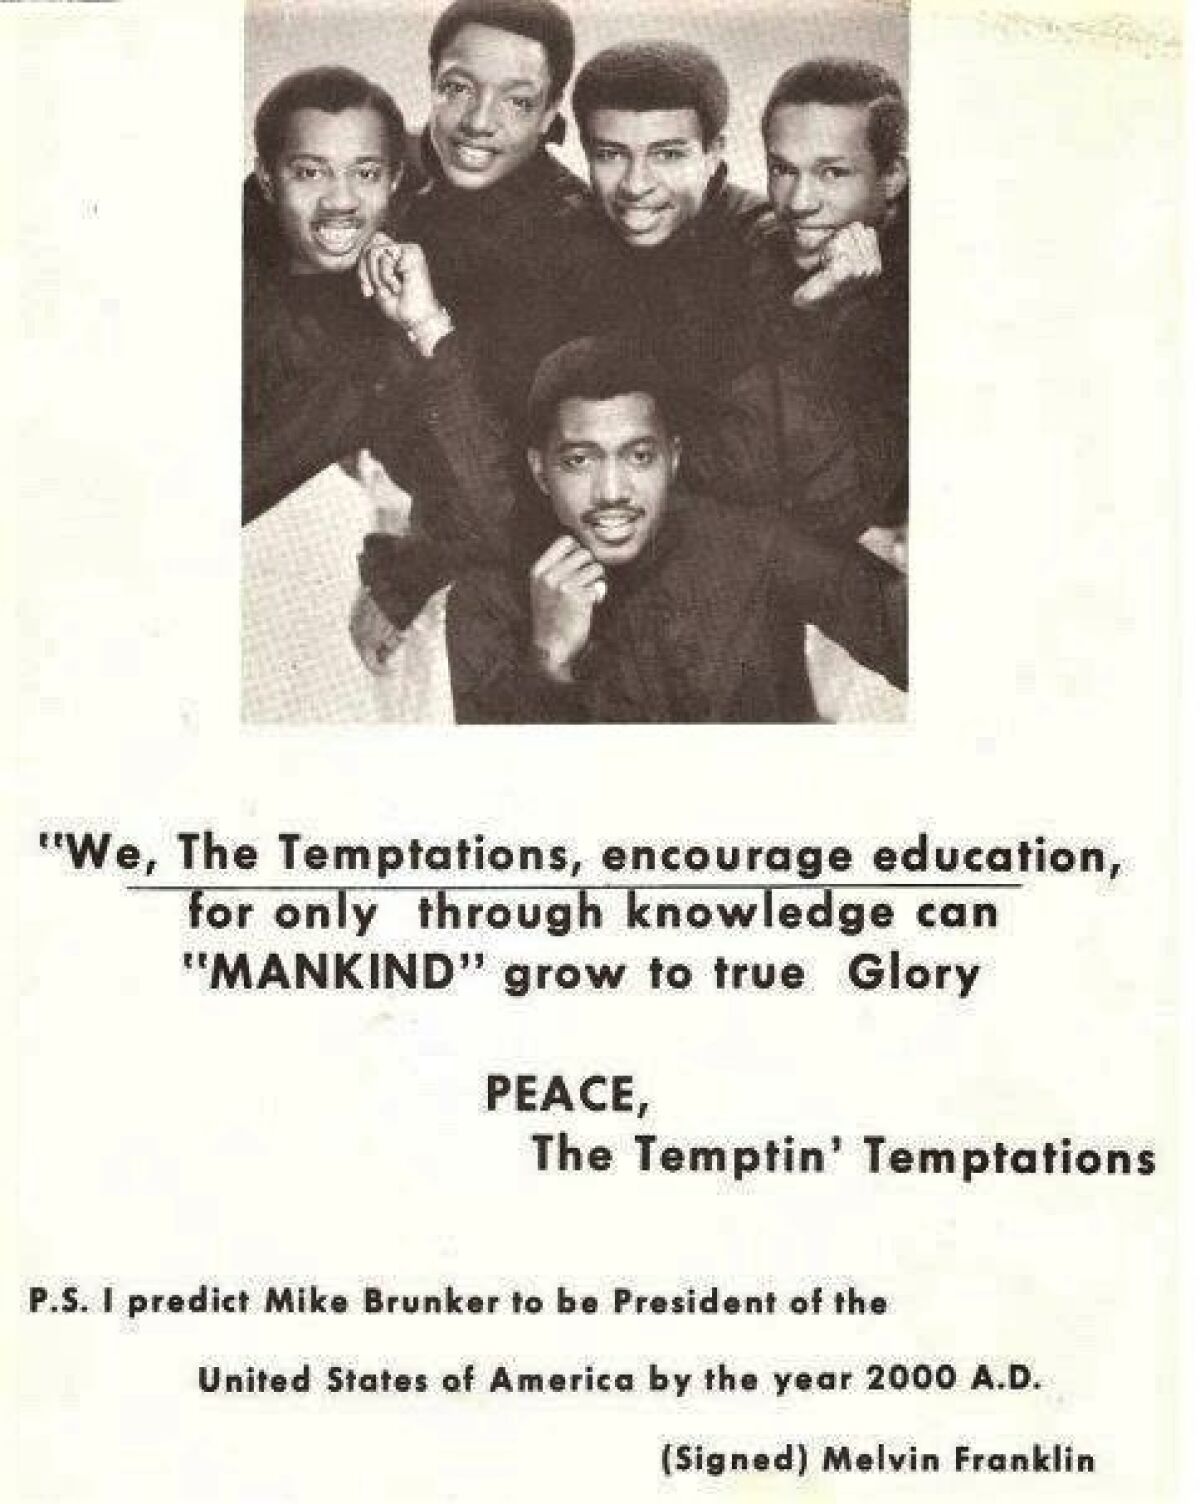 Singer Melvin Franklin, far left, was an original member of The Temptations. He was a neighbor of Michael Brunker in the Detroit suburb of Ferndale and took out the above ad in the 1970 St. James High School yearbook when Brunker was a senior.